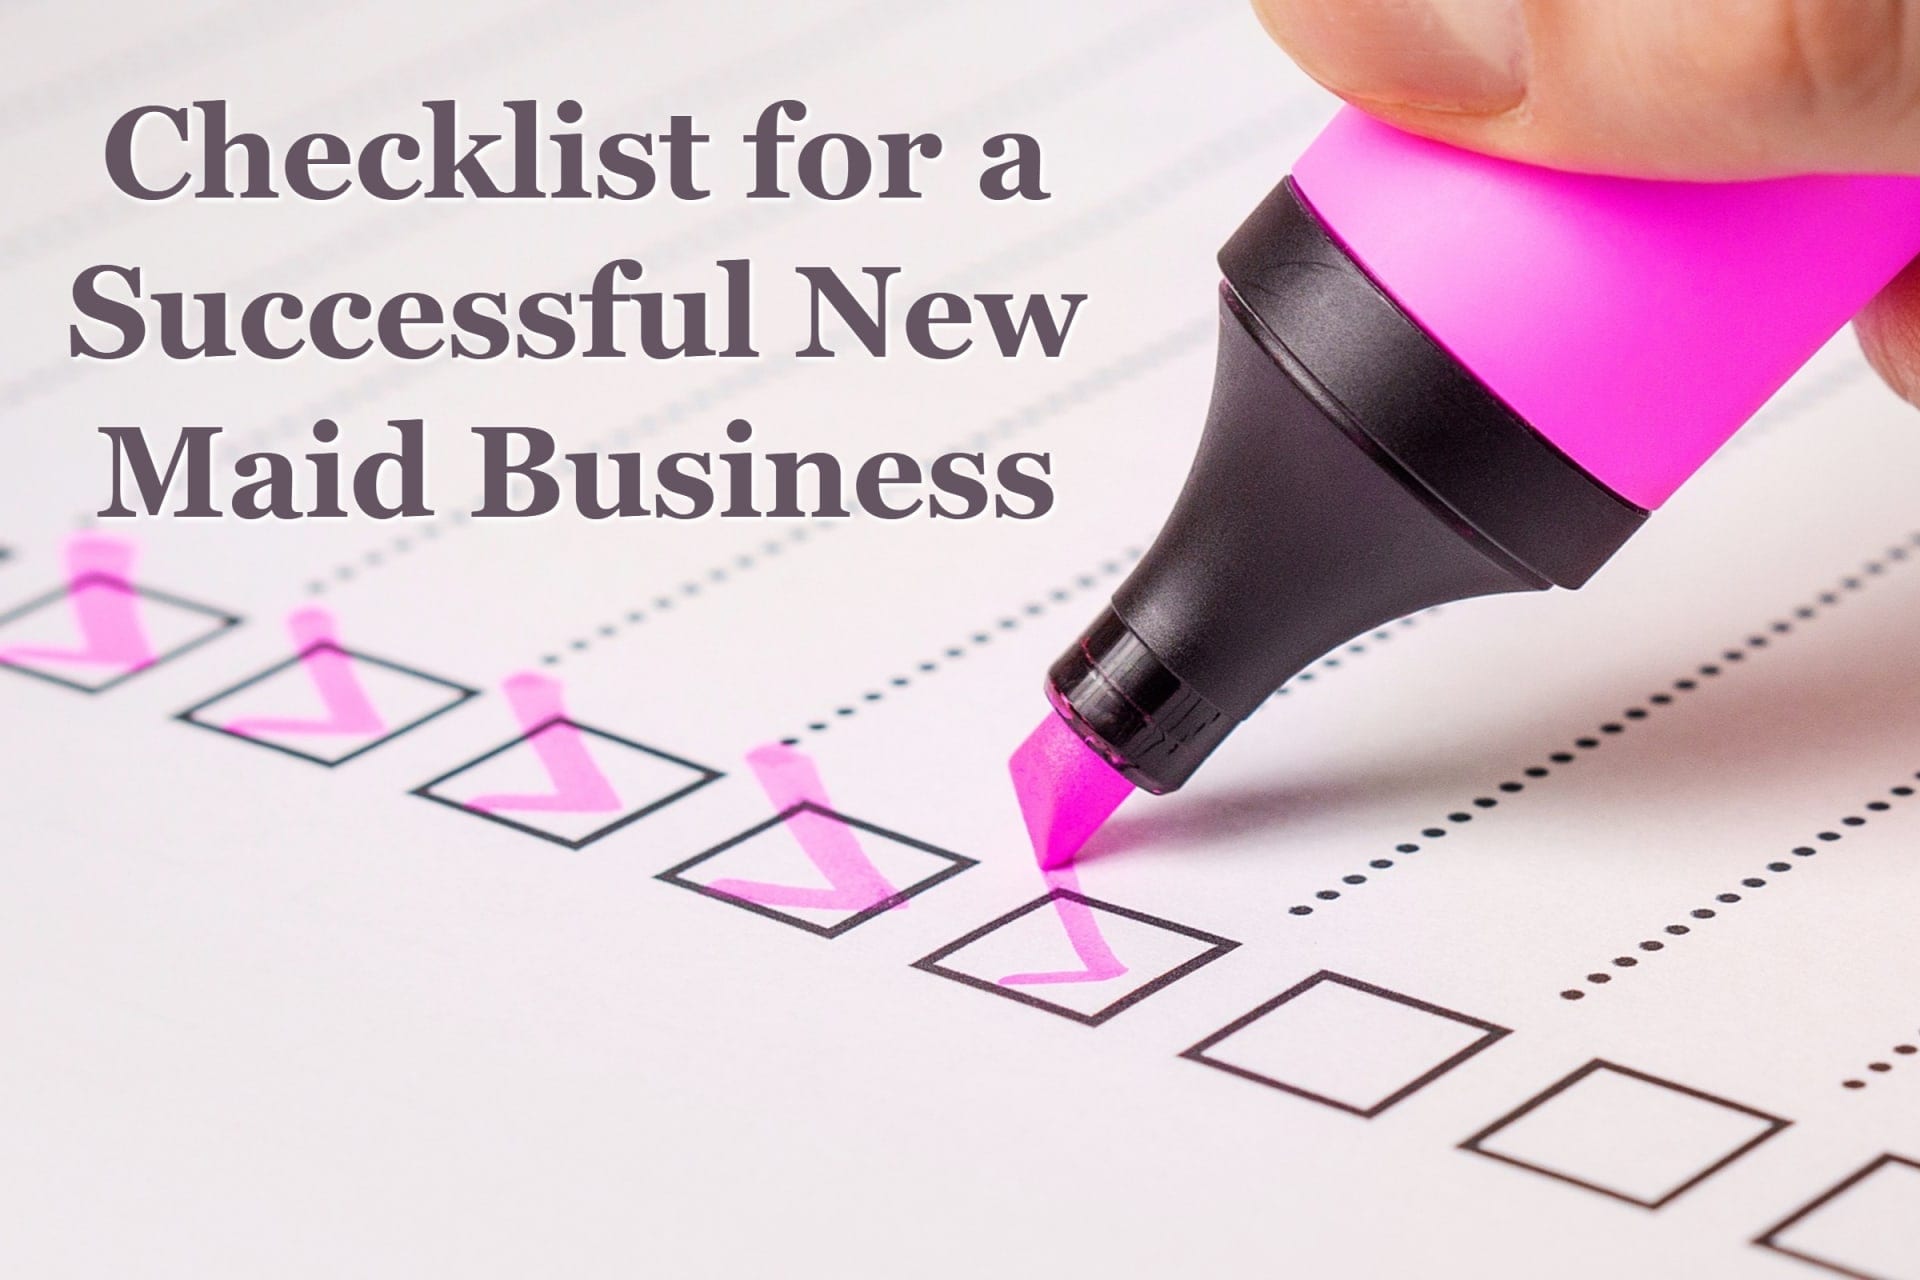 Checklist for a Successful New Maid Business